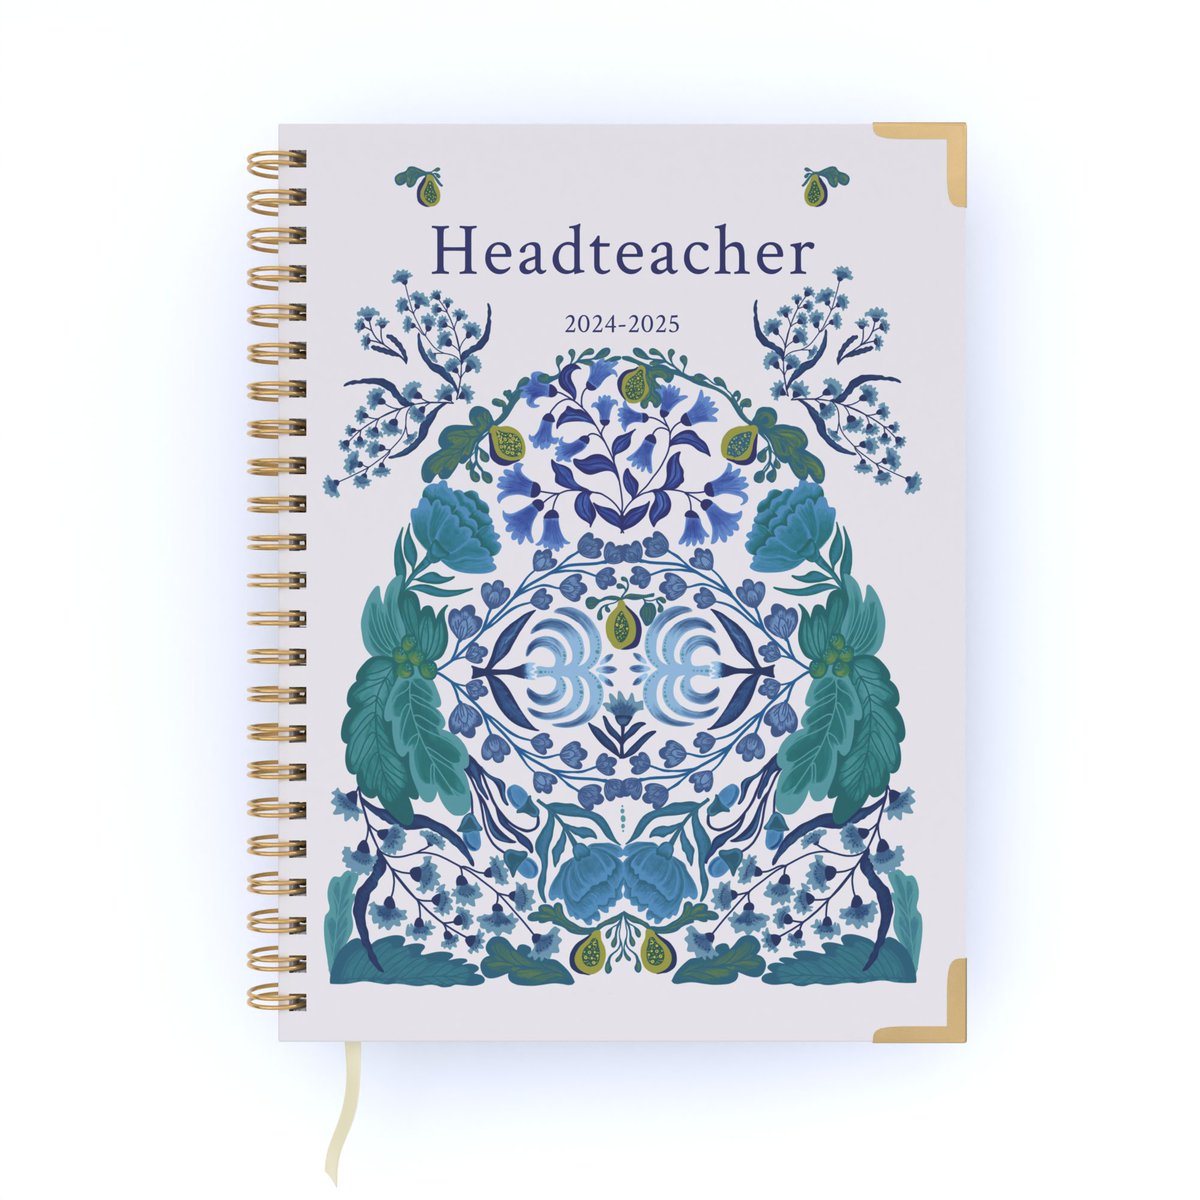 Need a new school leader planner? Get yours for a chance to win it FREE! Every order before Sunday 14th at 10 pm is a chance to win a full refund. Shop now: headteacherchat.com